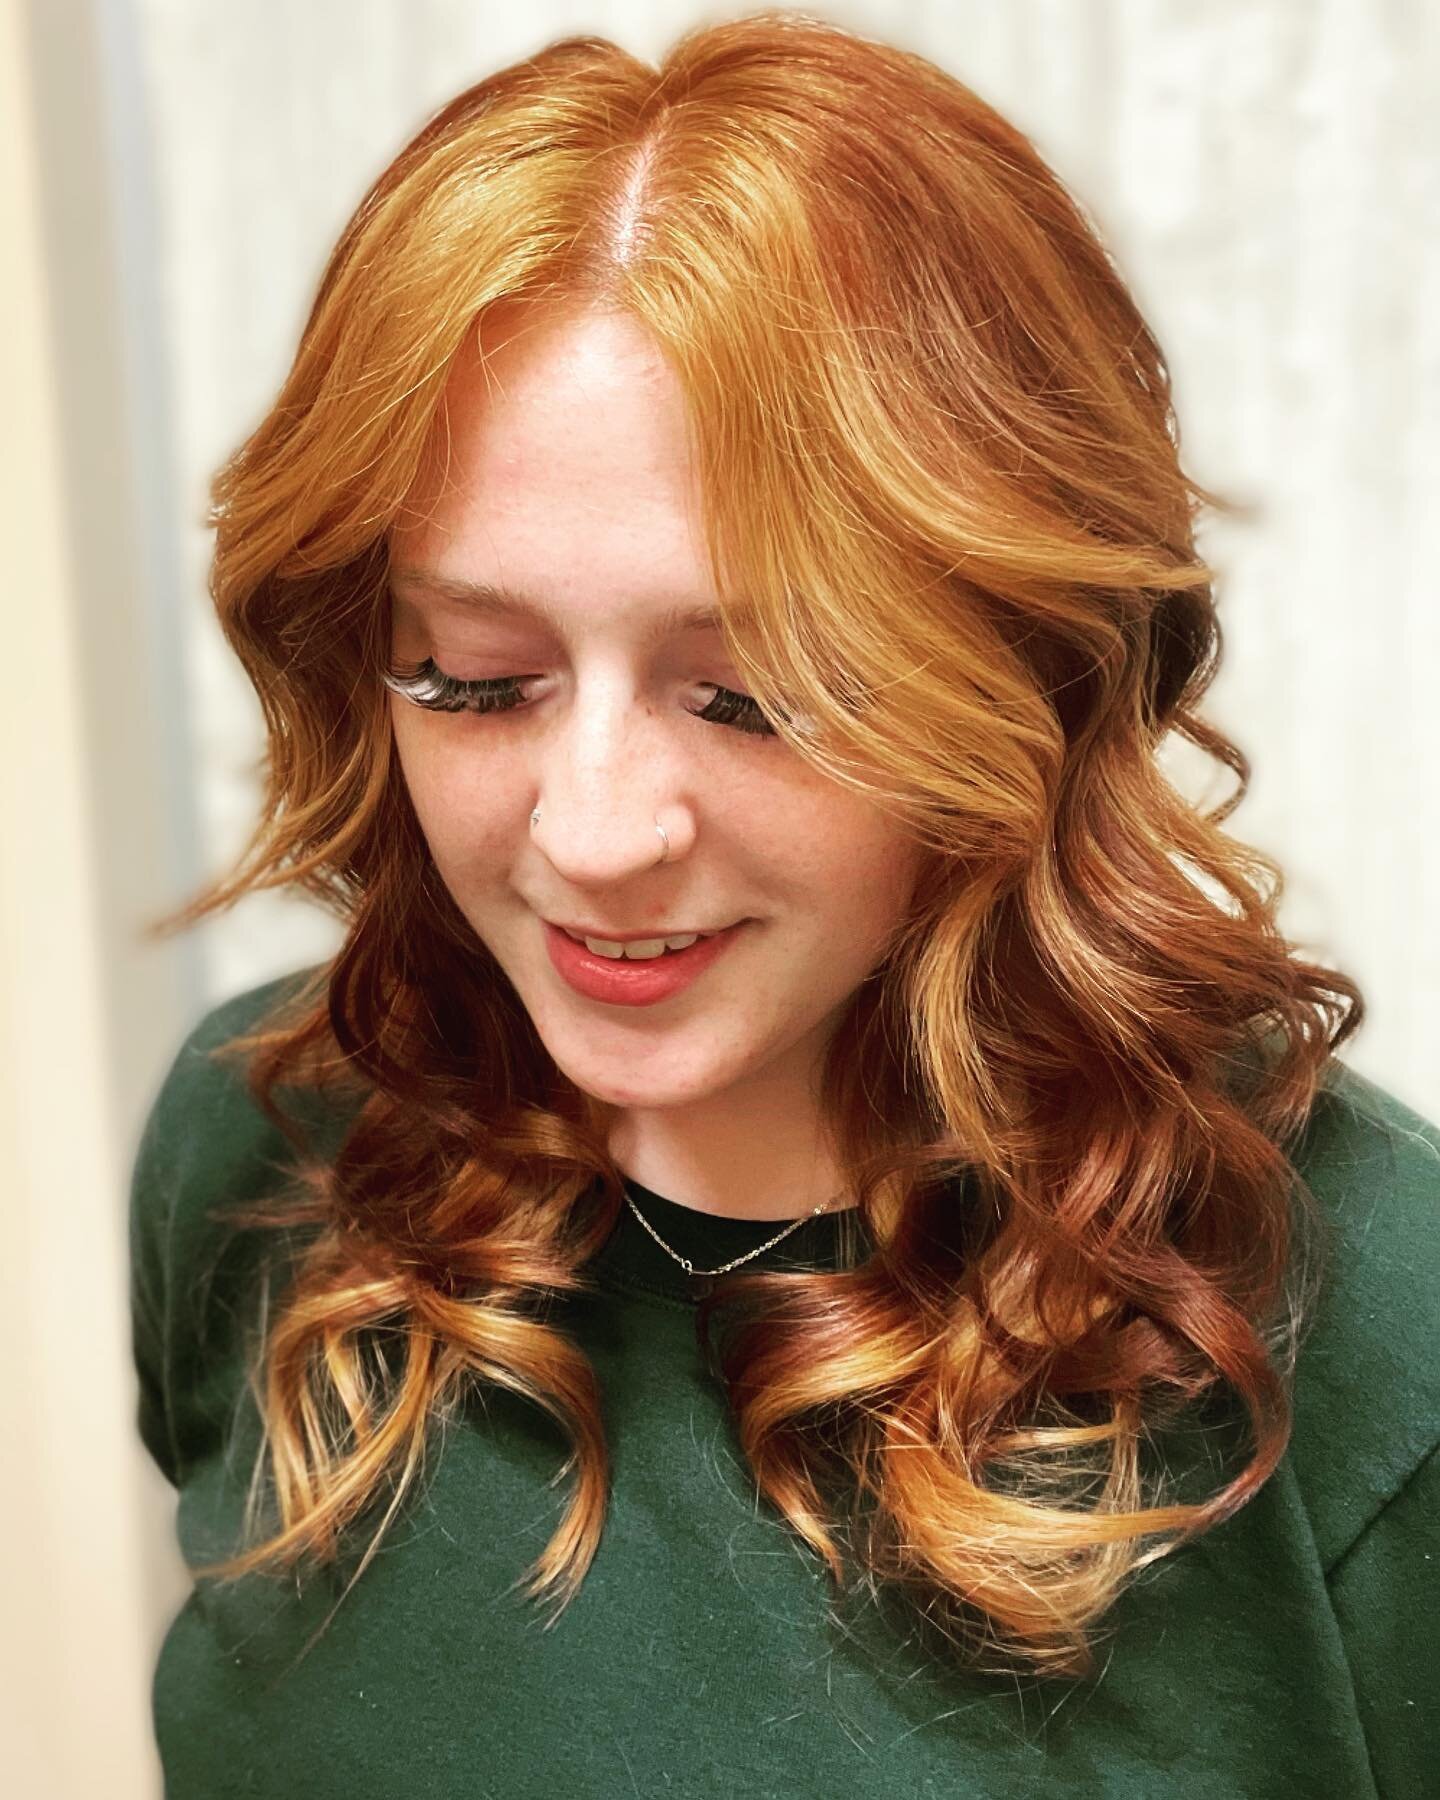 Maybe I&rsquo;m biased, but Redheads are my absolute favorite!! AND this one is FIRE!!

It&rsquo;s all about getting that perfect copper. 🔥❤️🔥❤️🔥❤️🔥❤️🔥❤️🔥❤️

#copperhair #redhead #bold #firehair #shaghaircut #redshag #gorgeous #gorgeousgirl #sp